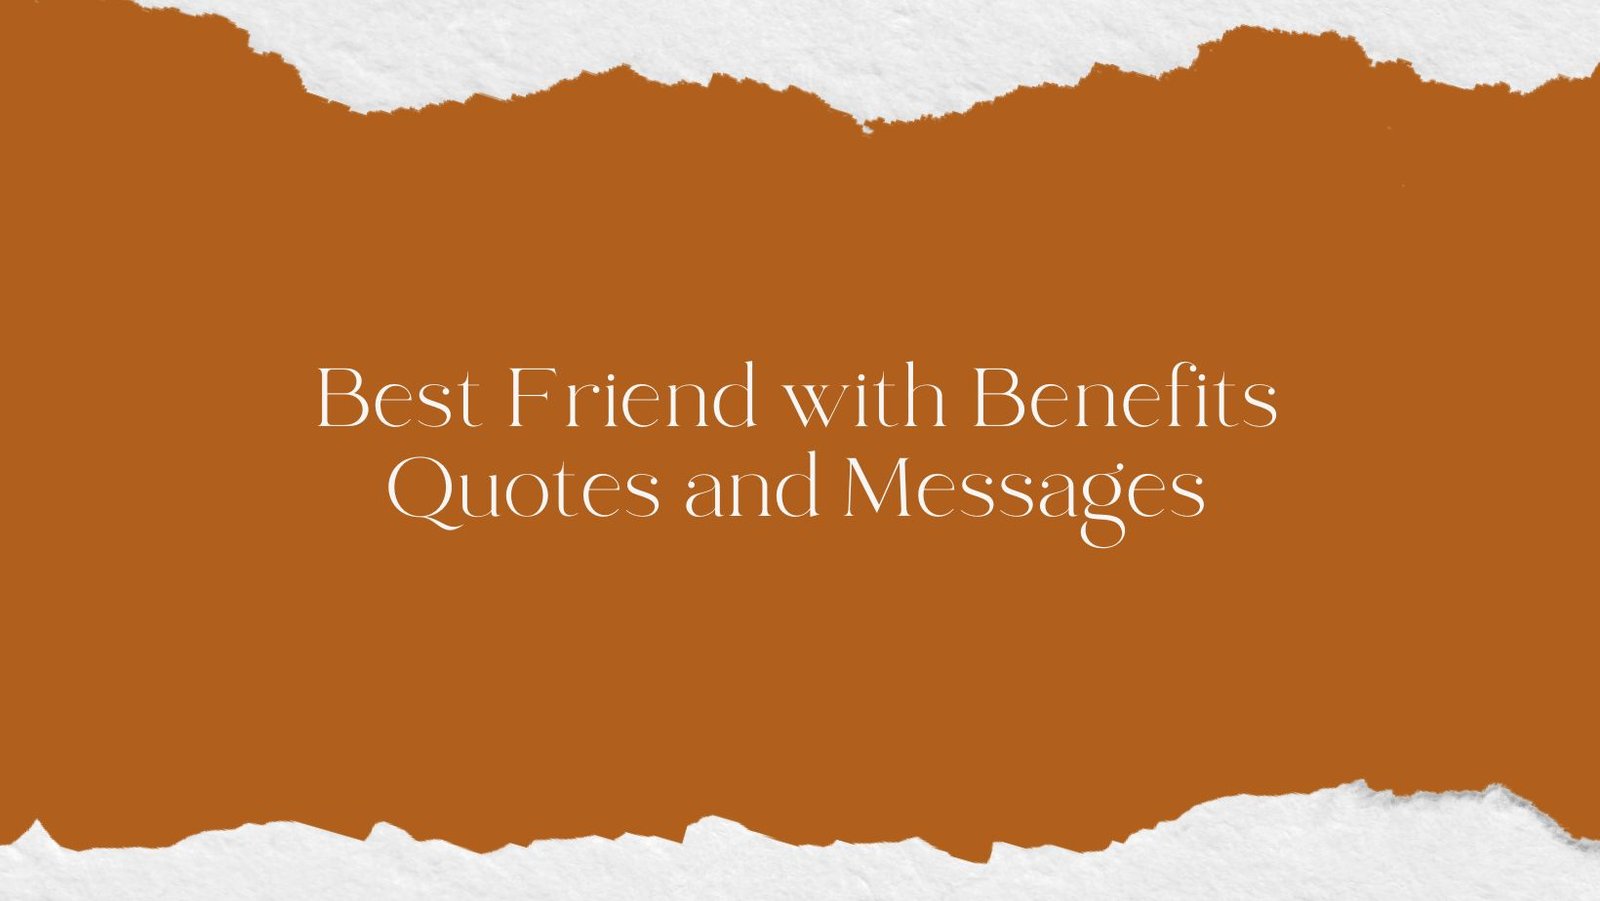 Best Friend with Benefits Quotes and Messages